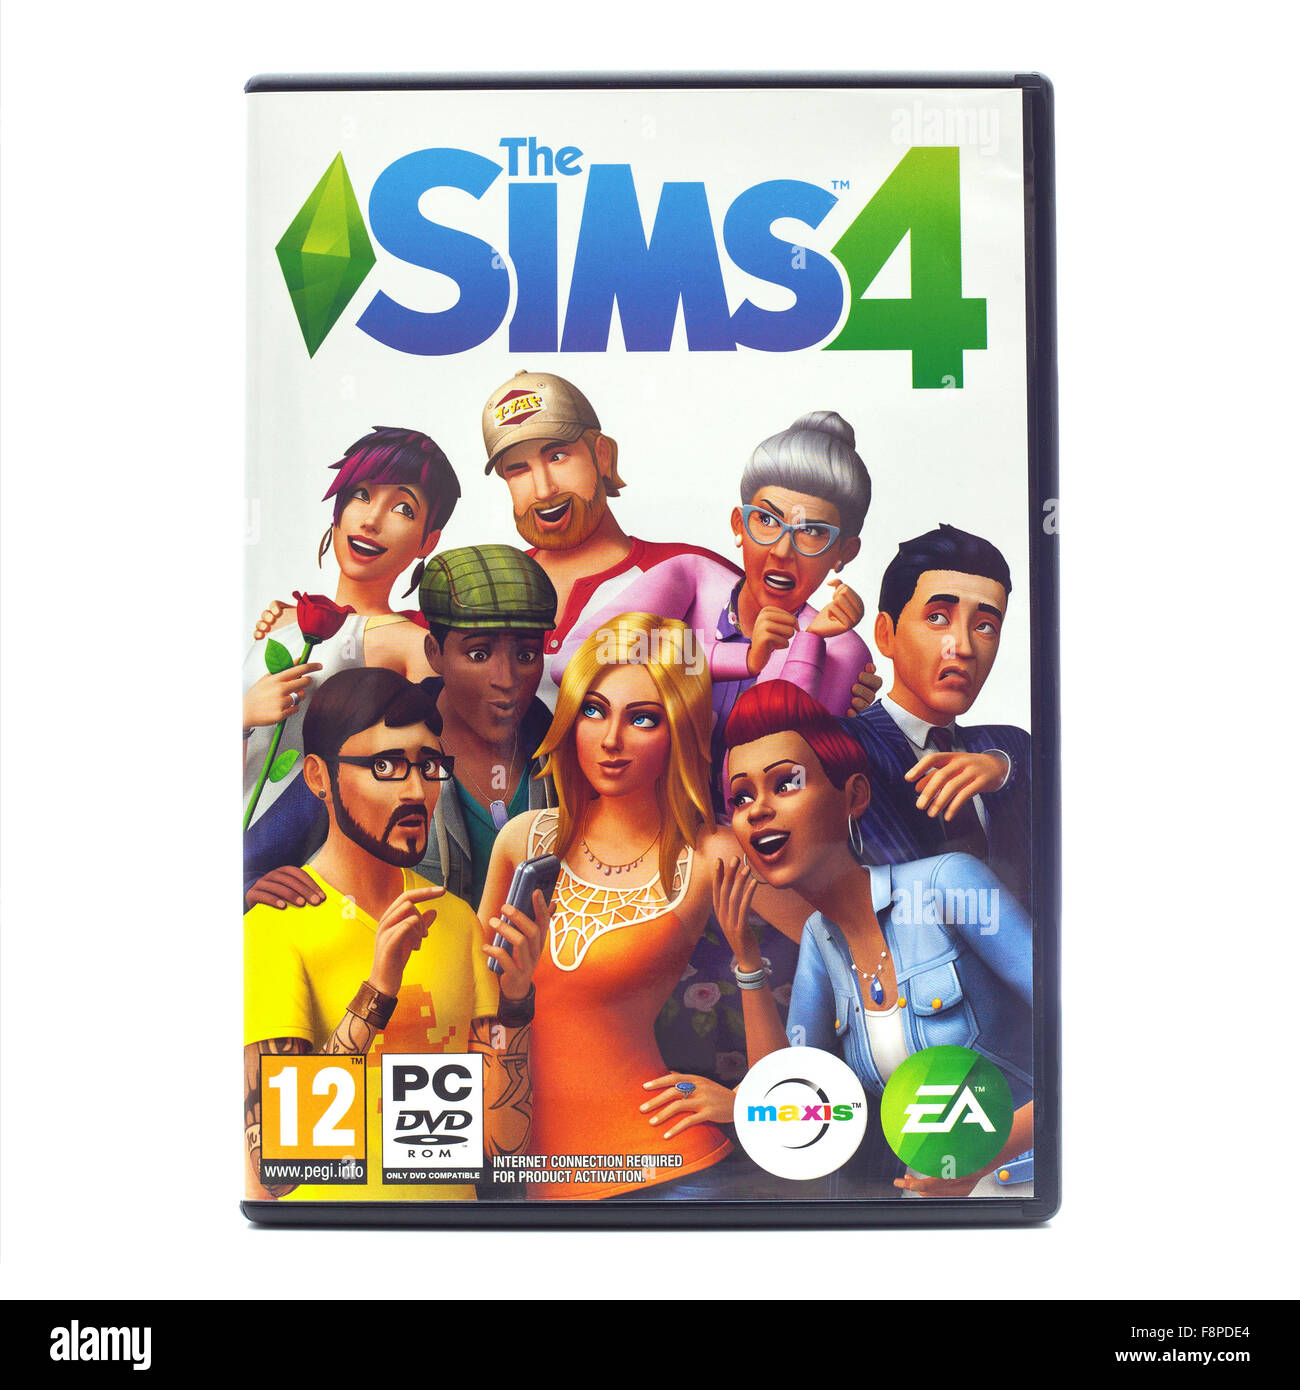 The Sims 4 game by EA on a White Background Stock Photo